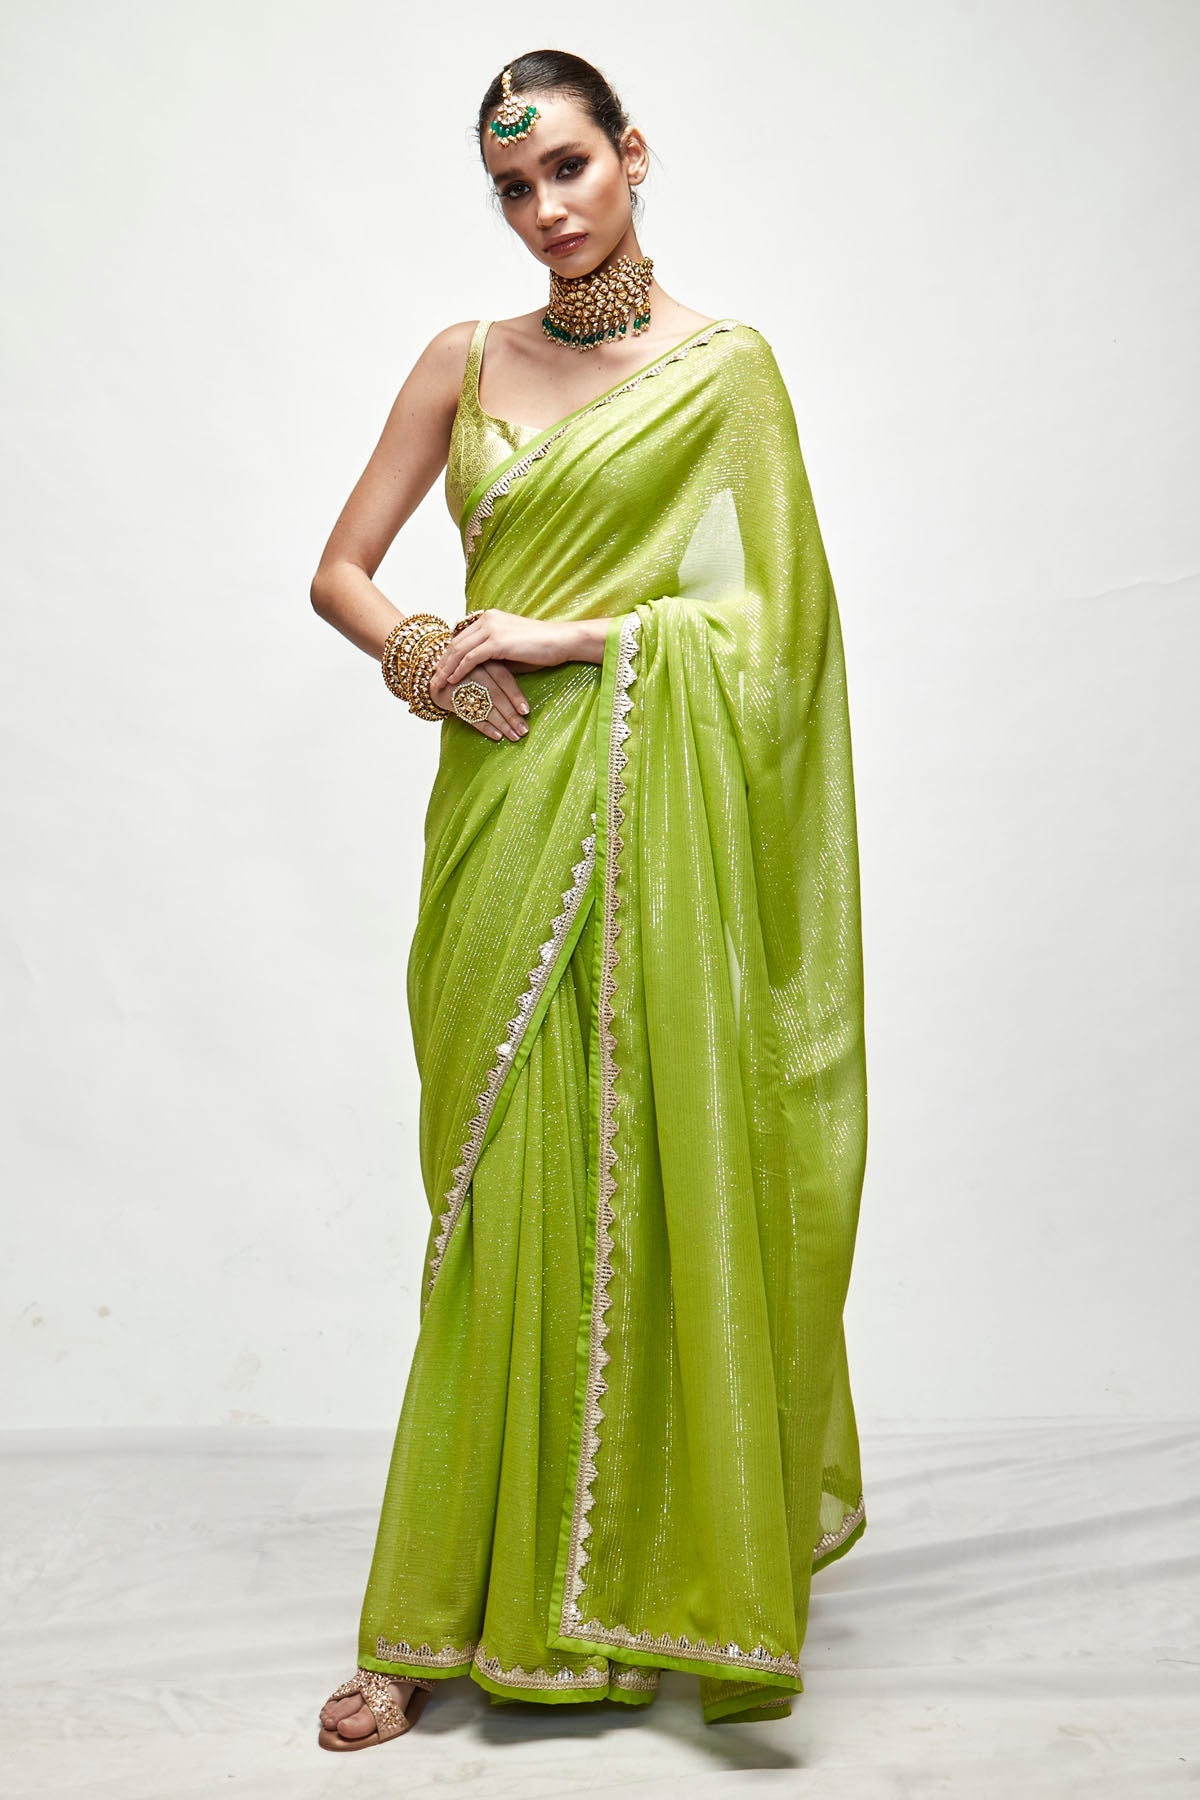 Designer Ranian Chartreuse green silk georgette saree with self woven gold and silver metallic threads, gota and silk satin paired with silk brocade champagne matt zari blouse For Women Online at ScrollnShops